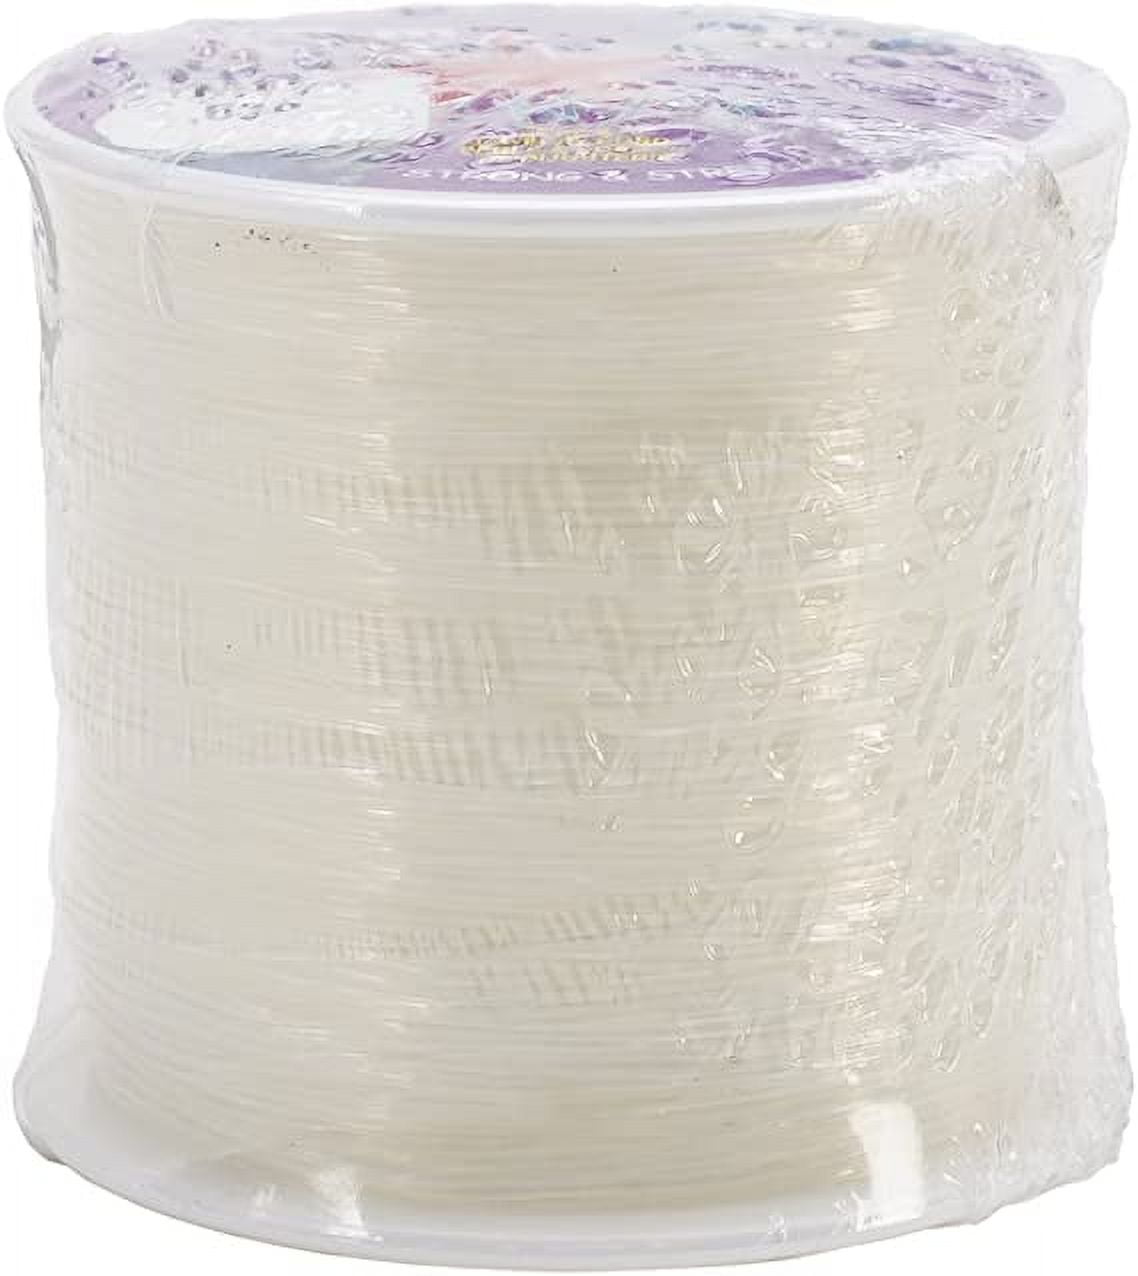 Stretch Magic Cord, Round .8mm (.031 Inch) Thick, 25 Meter Spool, Clear